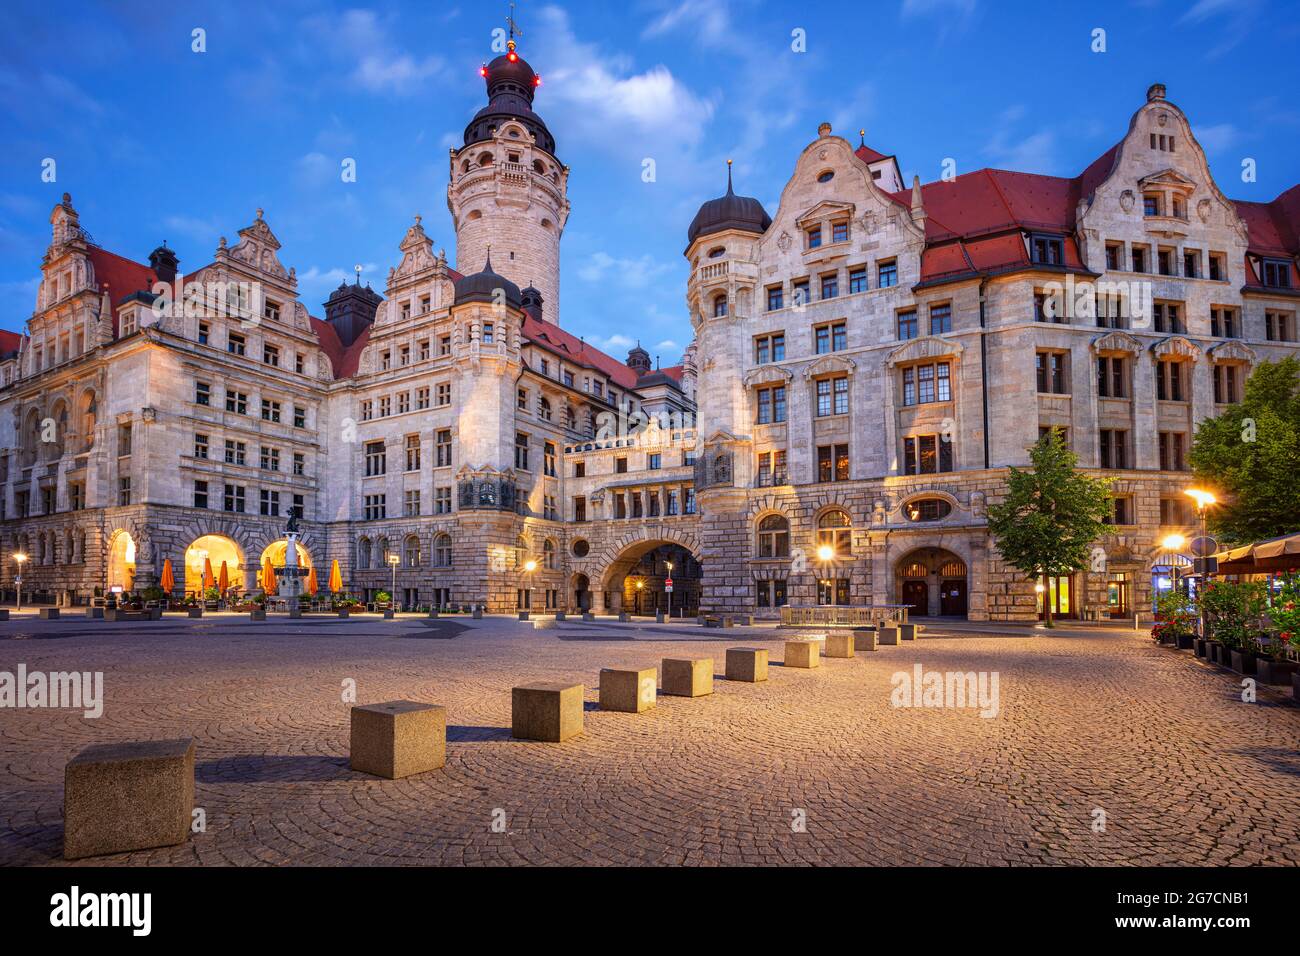 Leipzig, Germany. Cityscape image of Leipzig, Germany with New Town Hall at twilight blue hour. Stock Photo